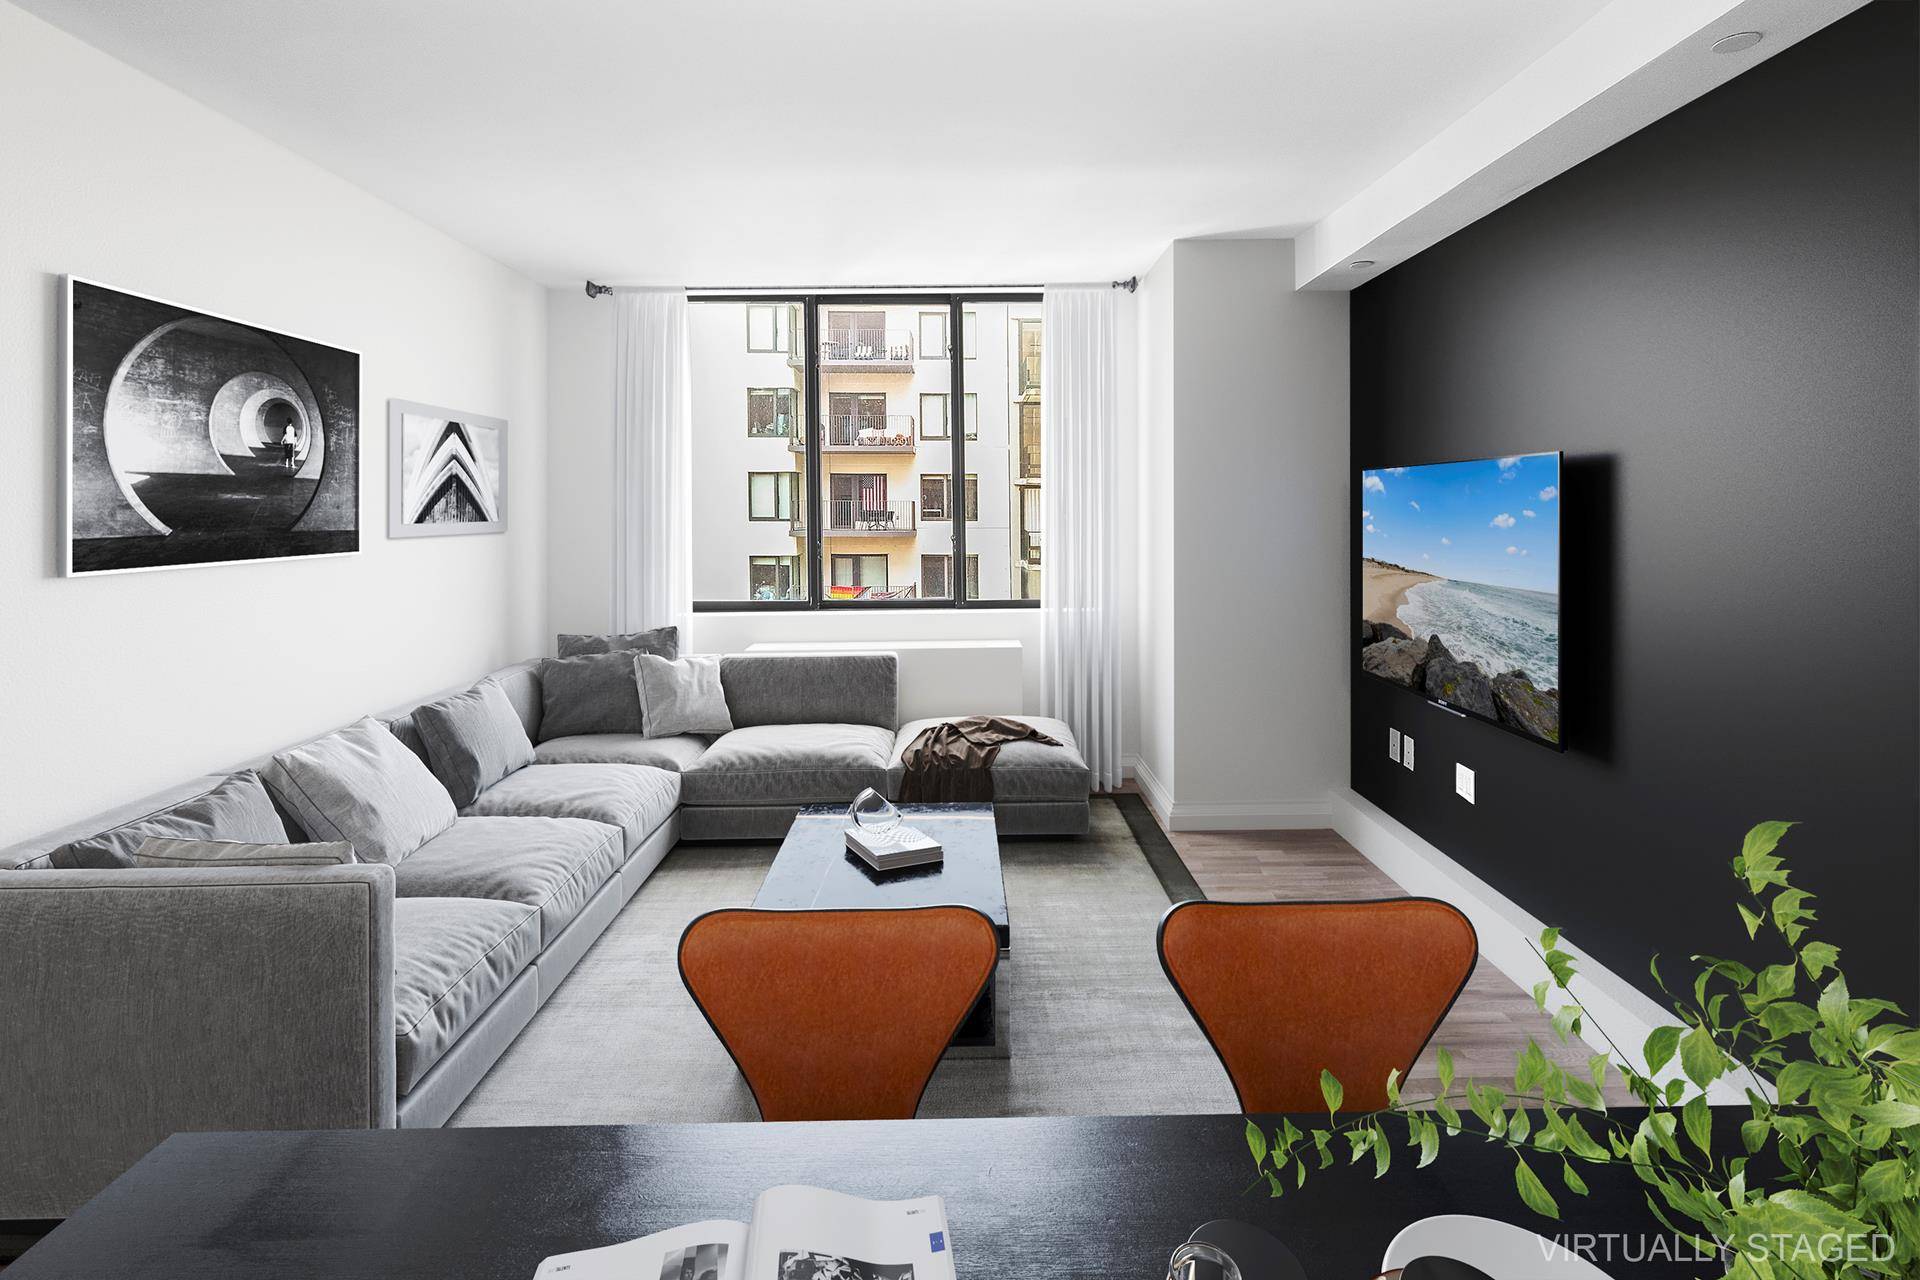 Nolita Place Condominiums Large two bedroom Condo, Located in the heart of Nolita, where the Bowery meets Spring.